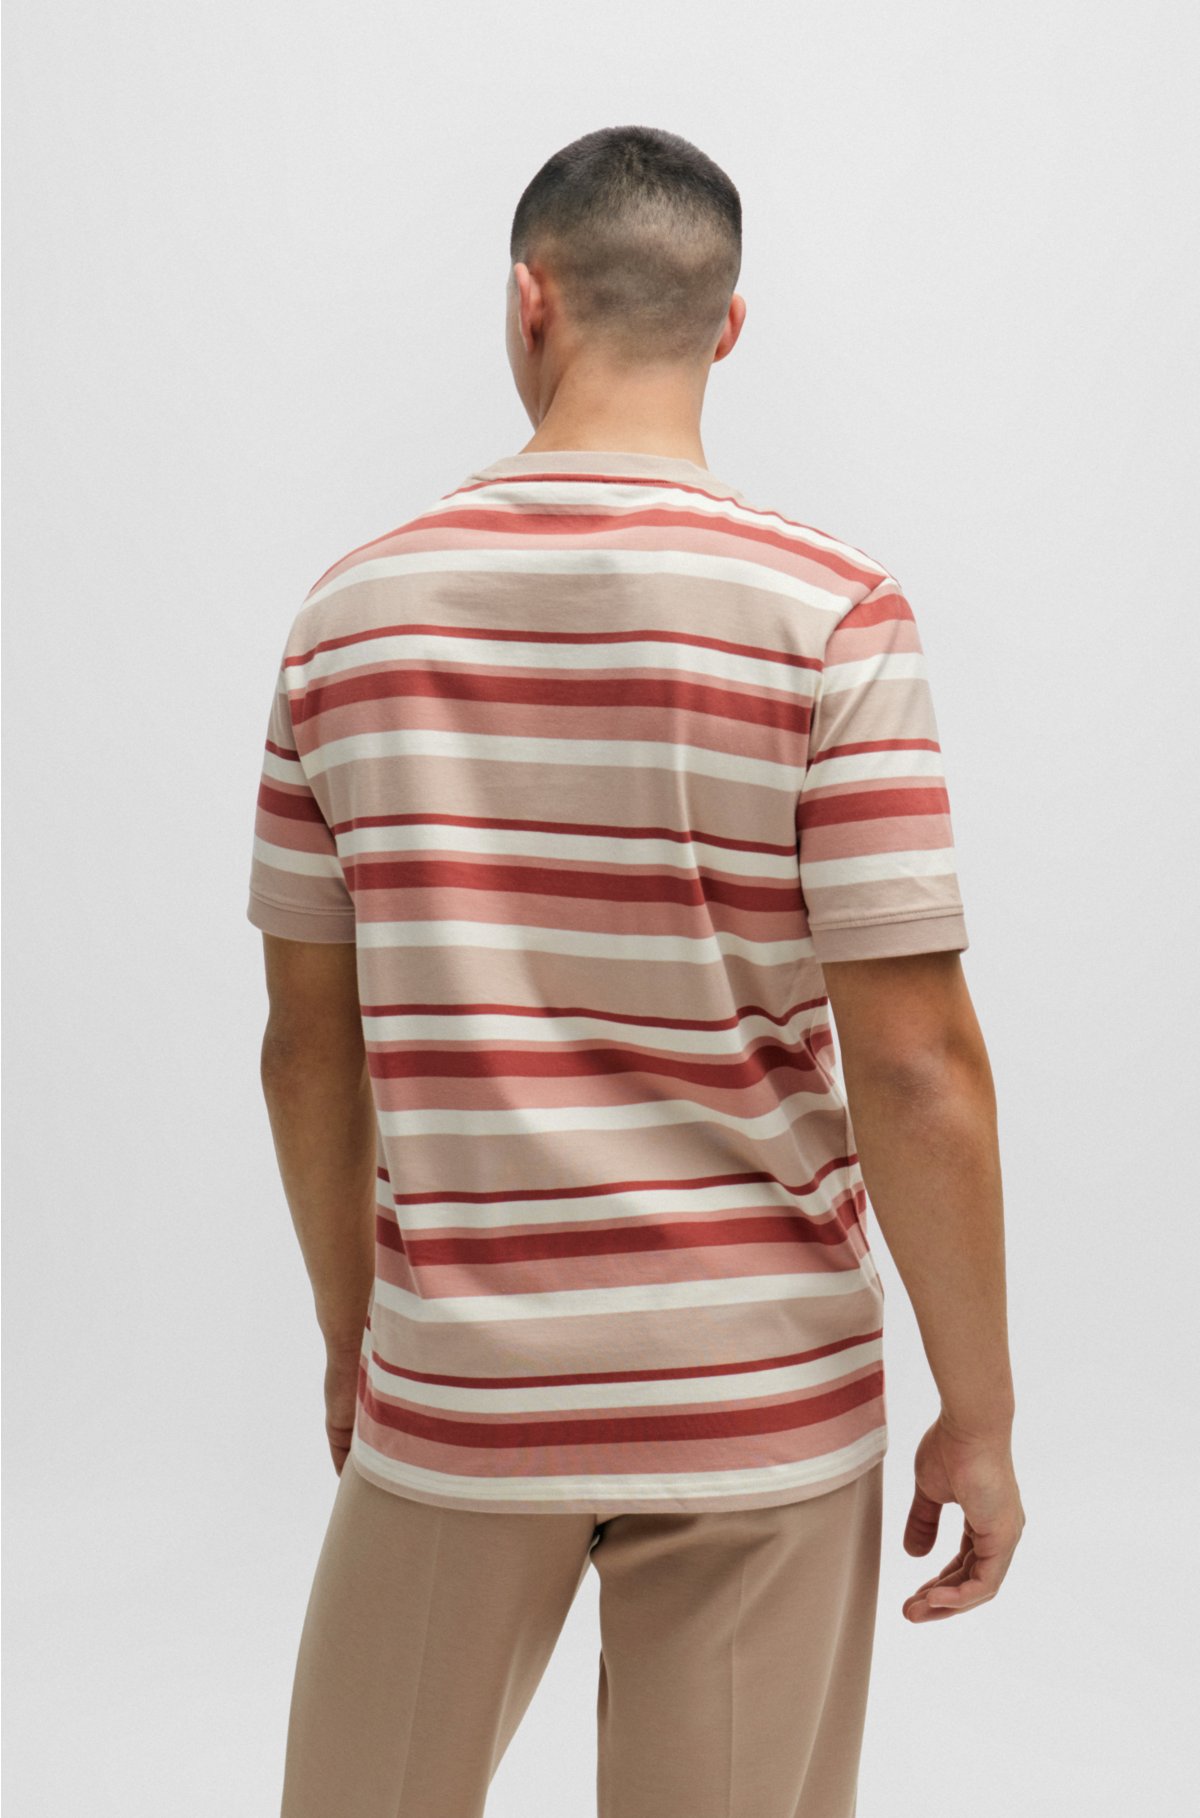 Striped T-shirt in cotton jersey with logo label, Patterned